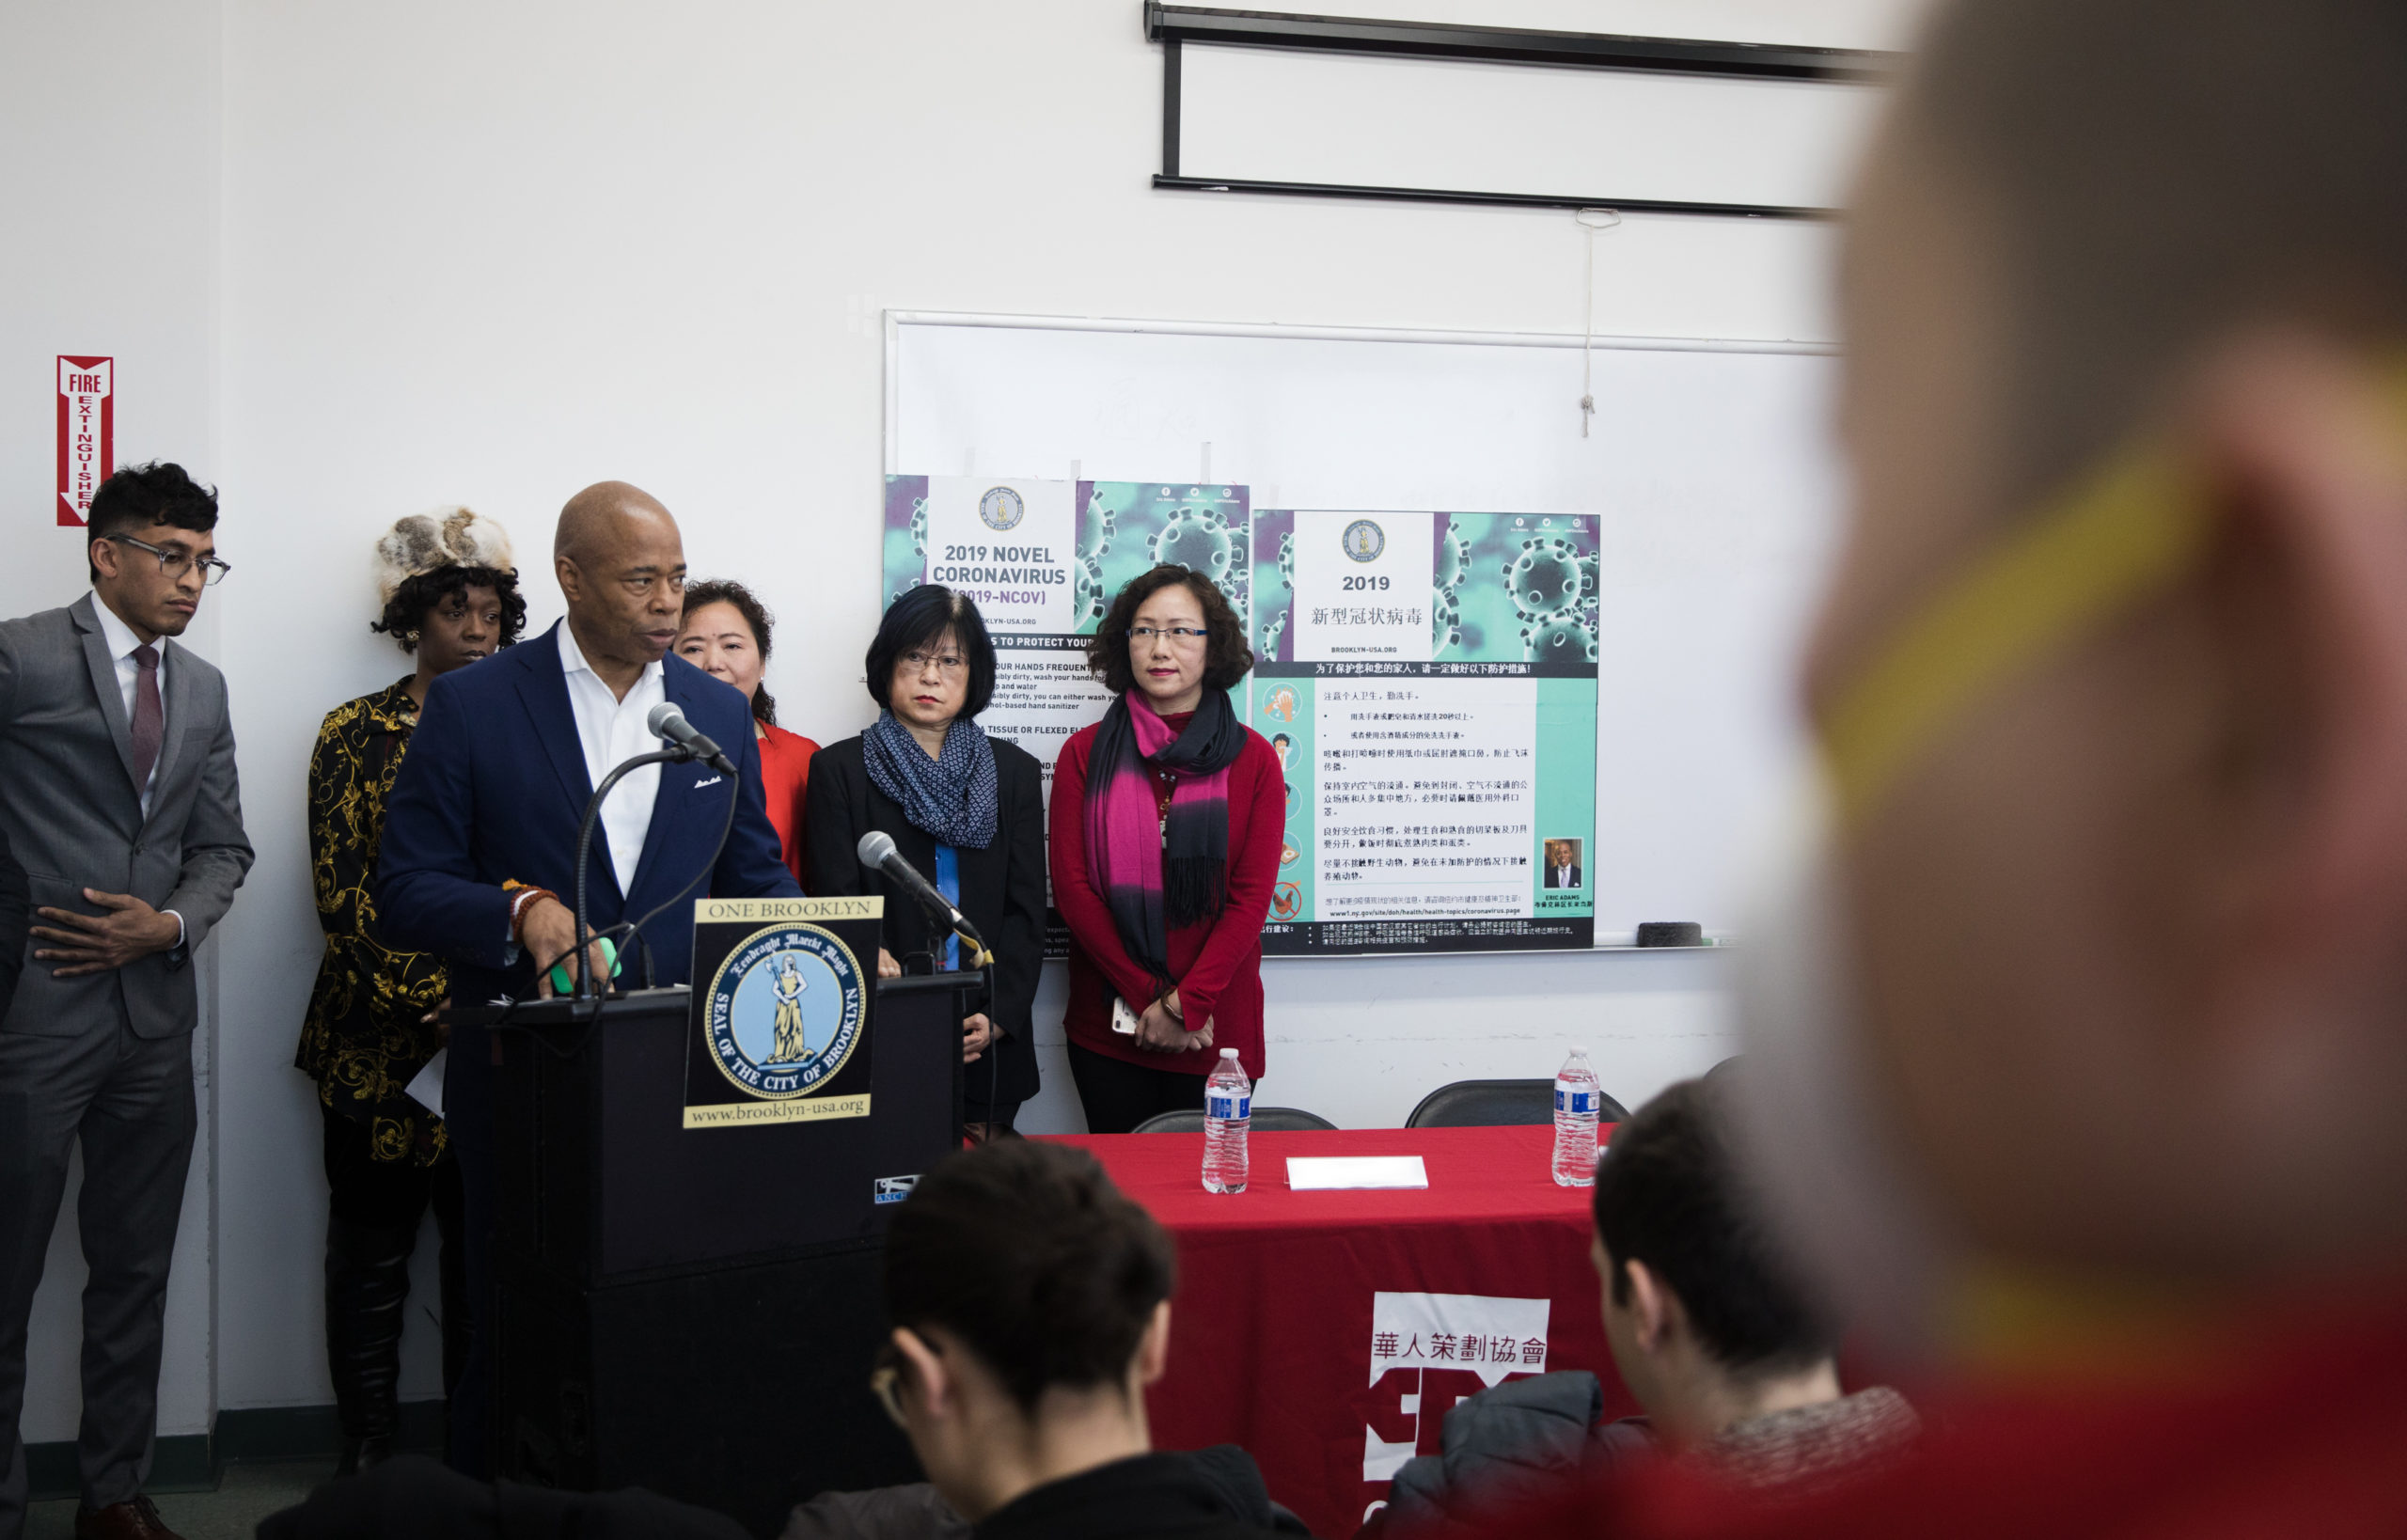 Brooklyn Borough President Eric Adams discusses the borough’s plans to handle coronavirus at a press conference in Sunset Park. Photo: Paul Frangipane/Brooklyn Eagle